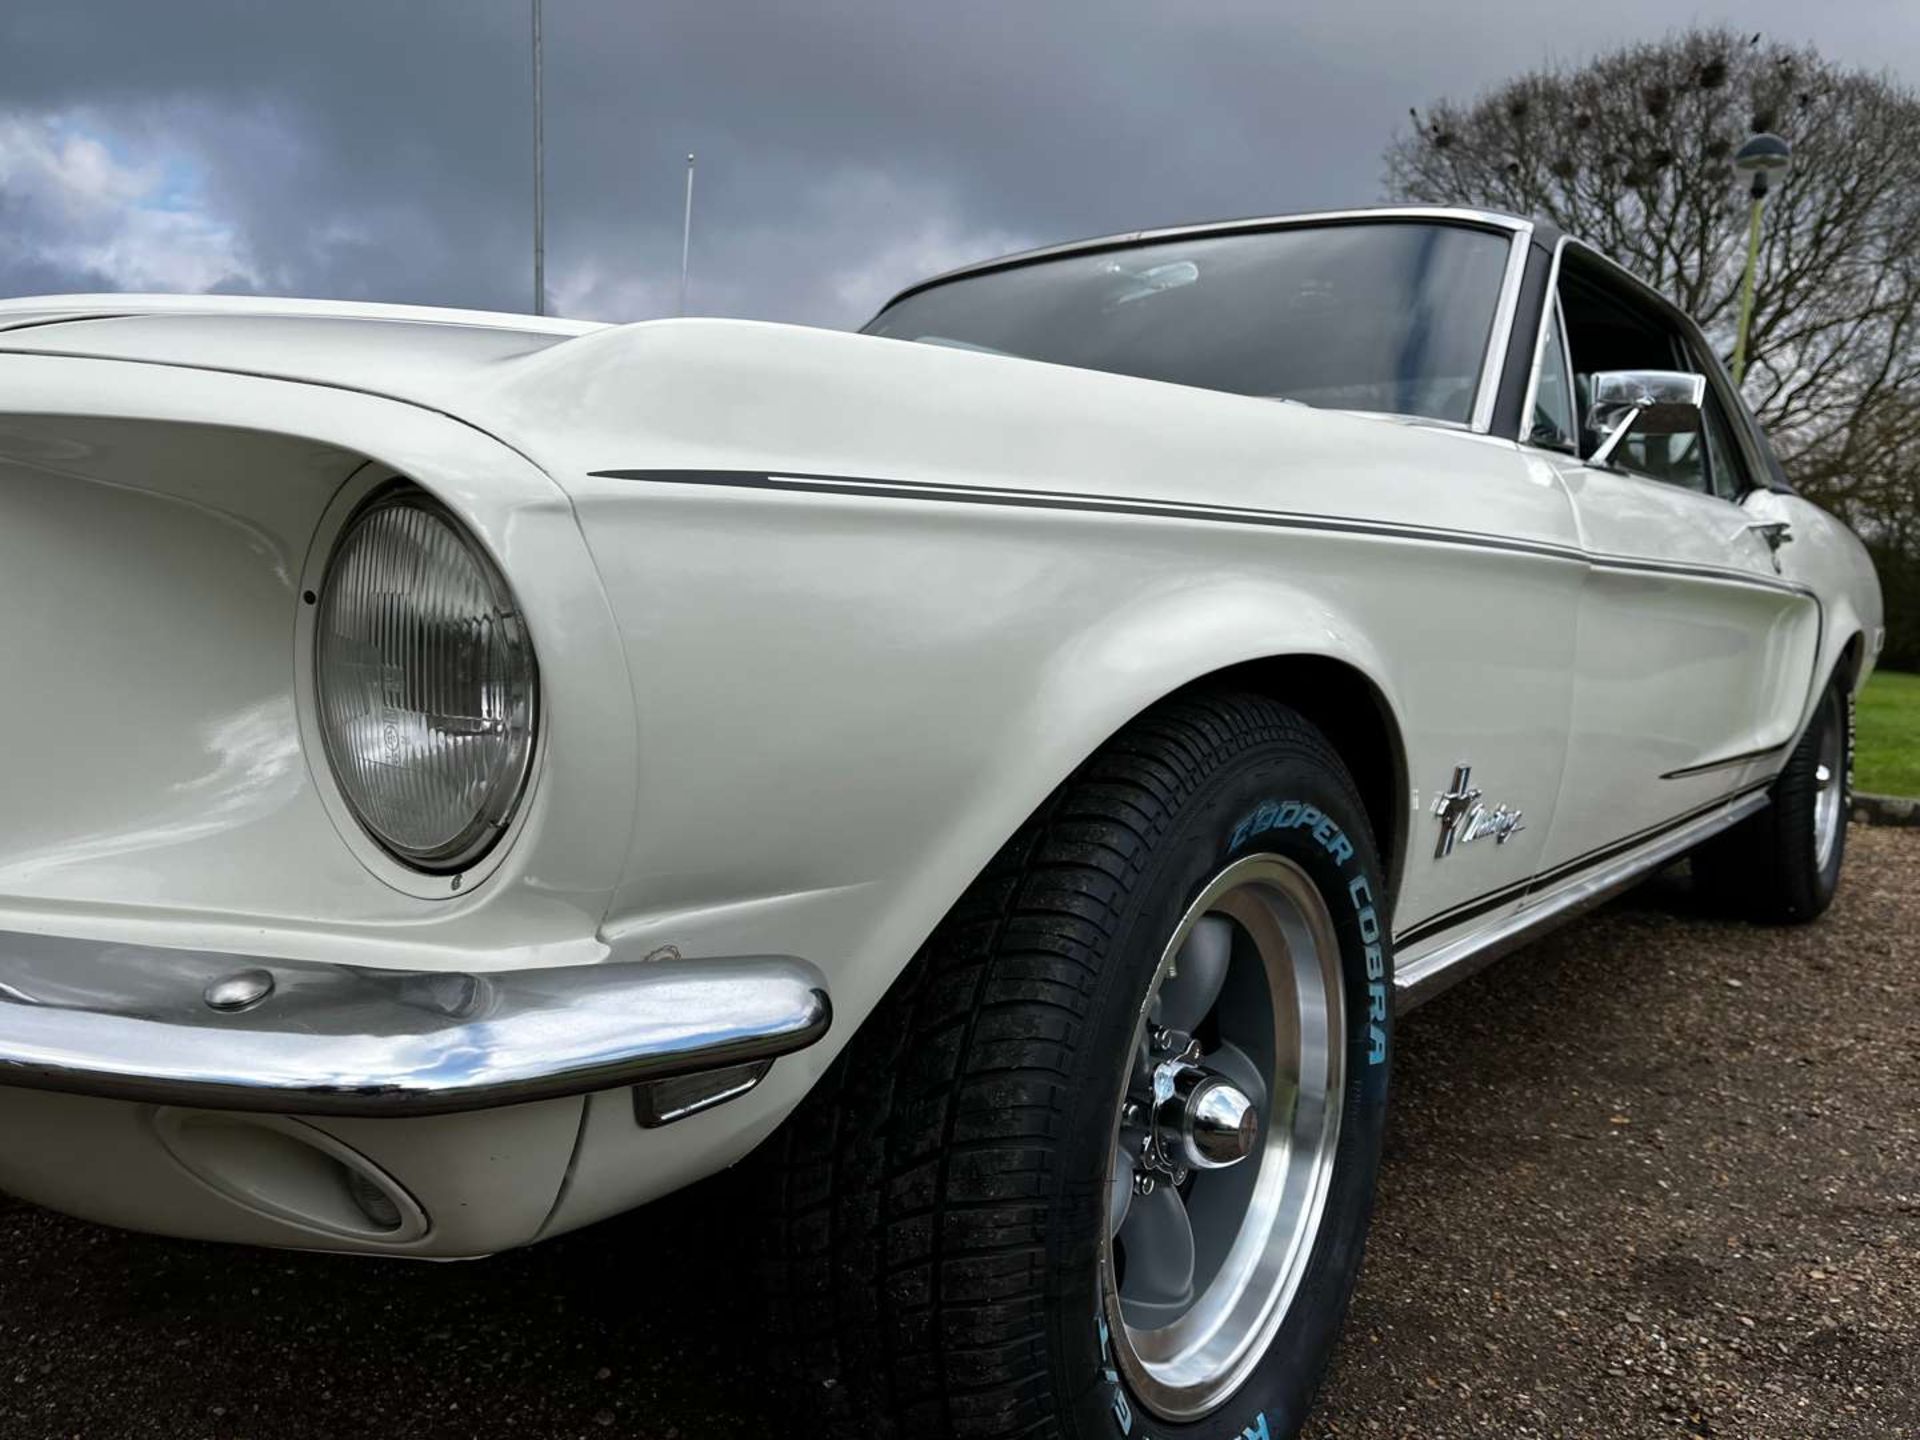 1968 FORD MUSTANG 5.0 V8 AUTO COUPE LHD - Image 9 of 29